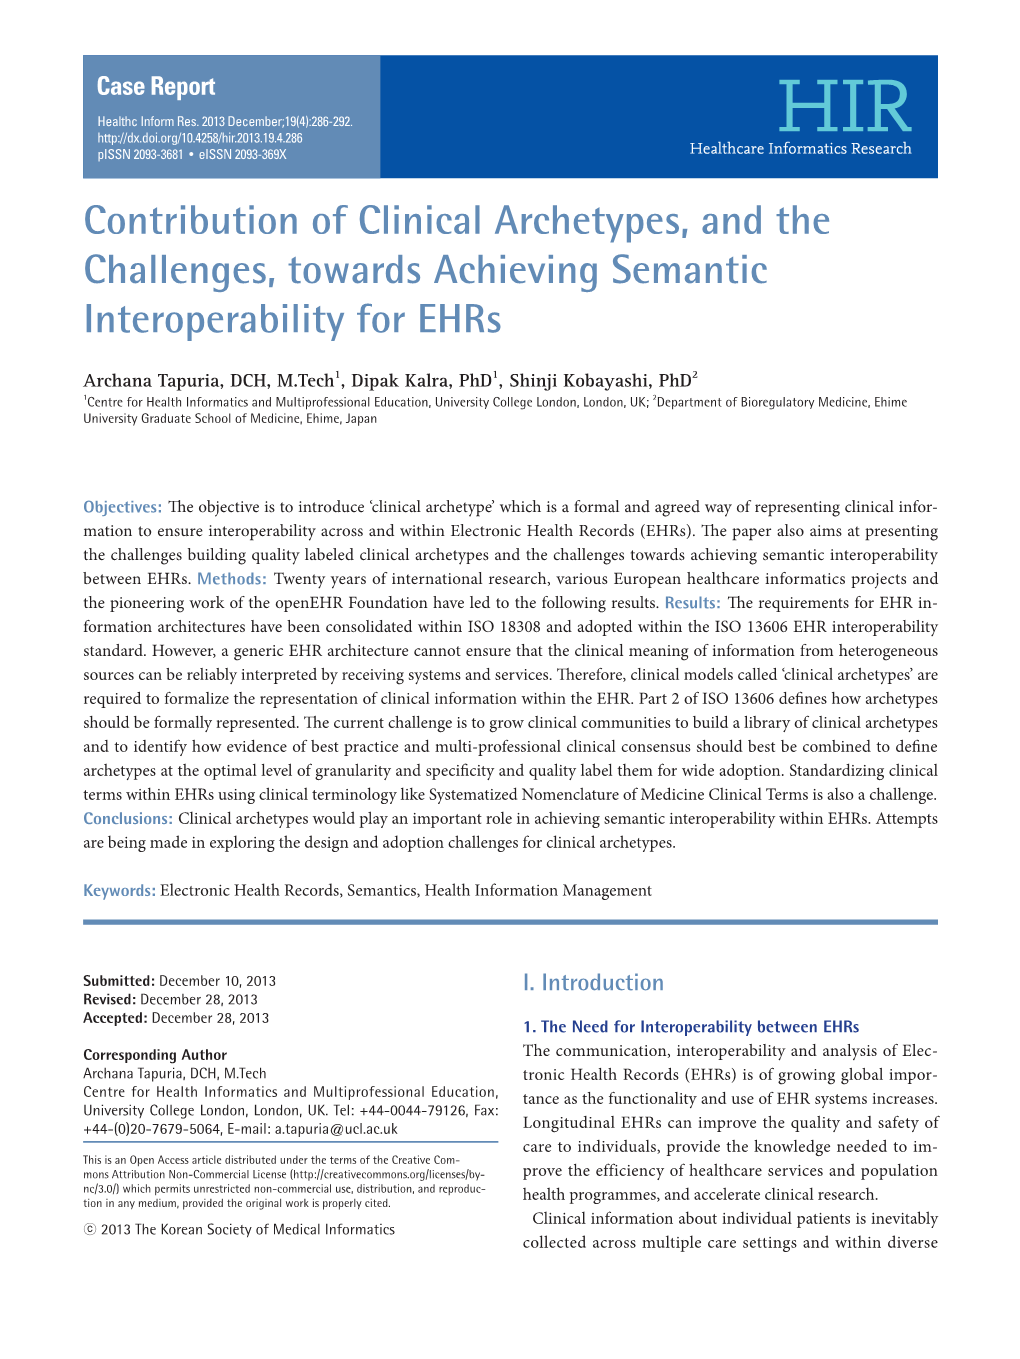 Contribution of Clinical Archetypes, and the Challenges, Towards Achieving Semantic Interoperability for Ehrs